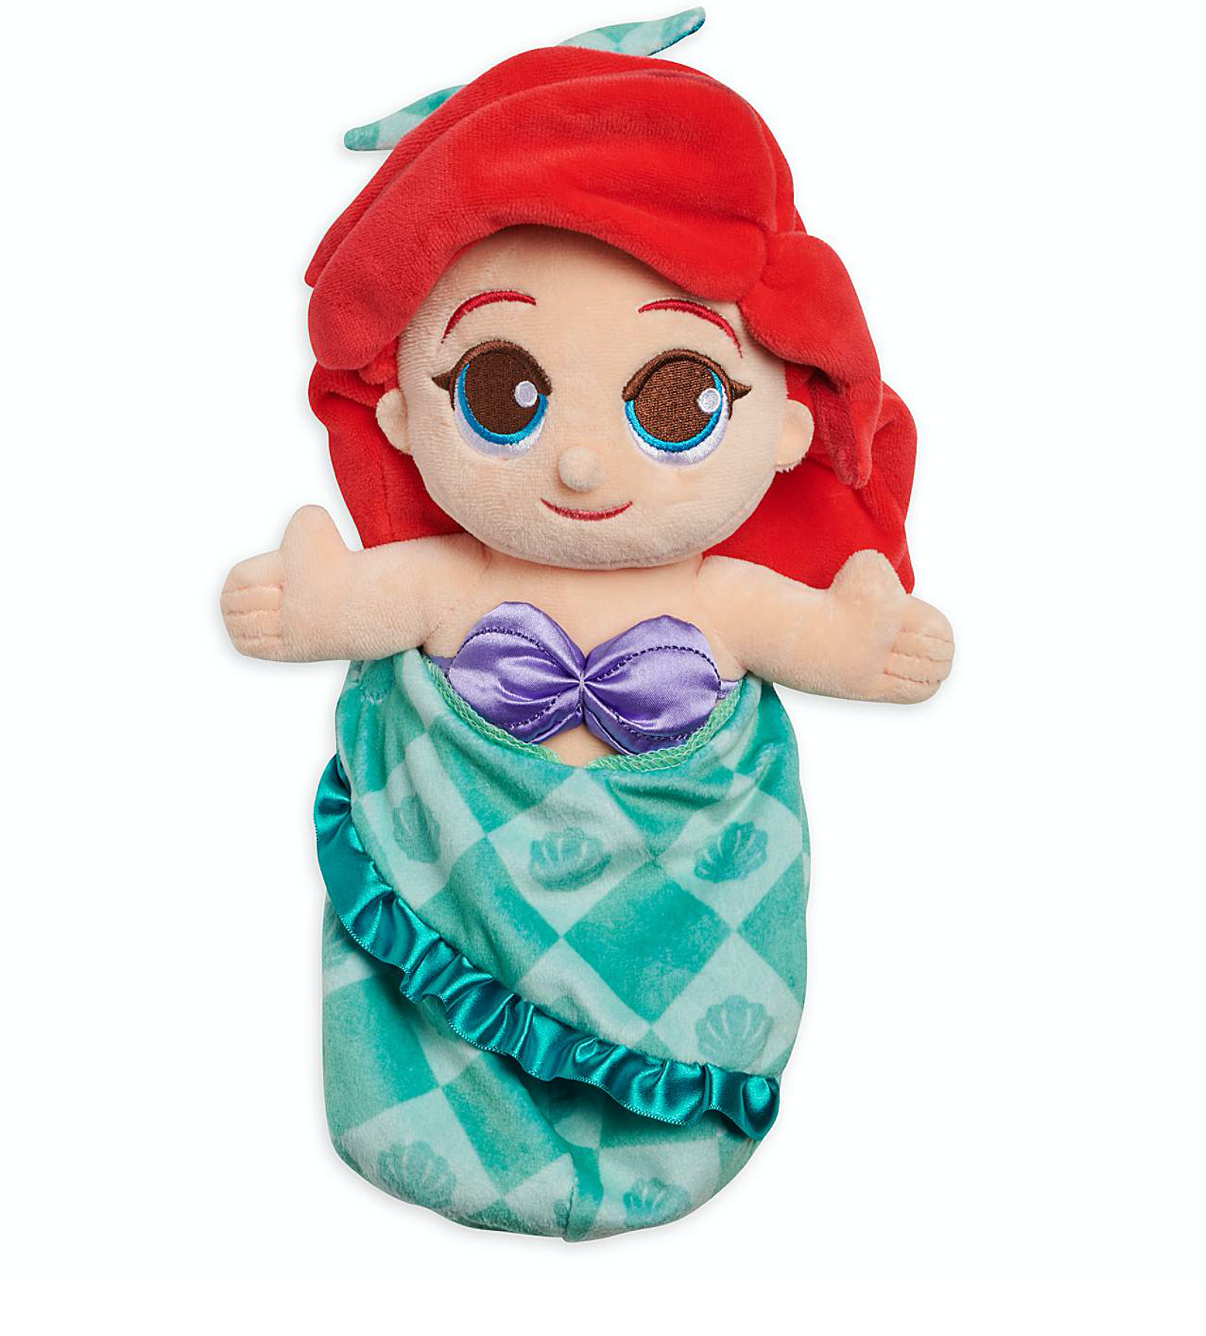 Disney Parks The Little Mermaid Baby Ariel in Blanket Pouch Plush New with Tags